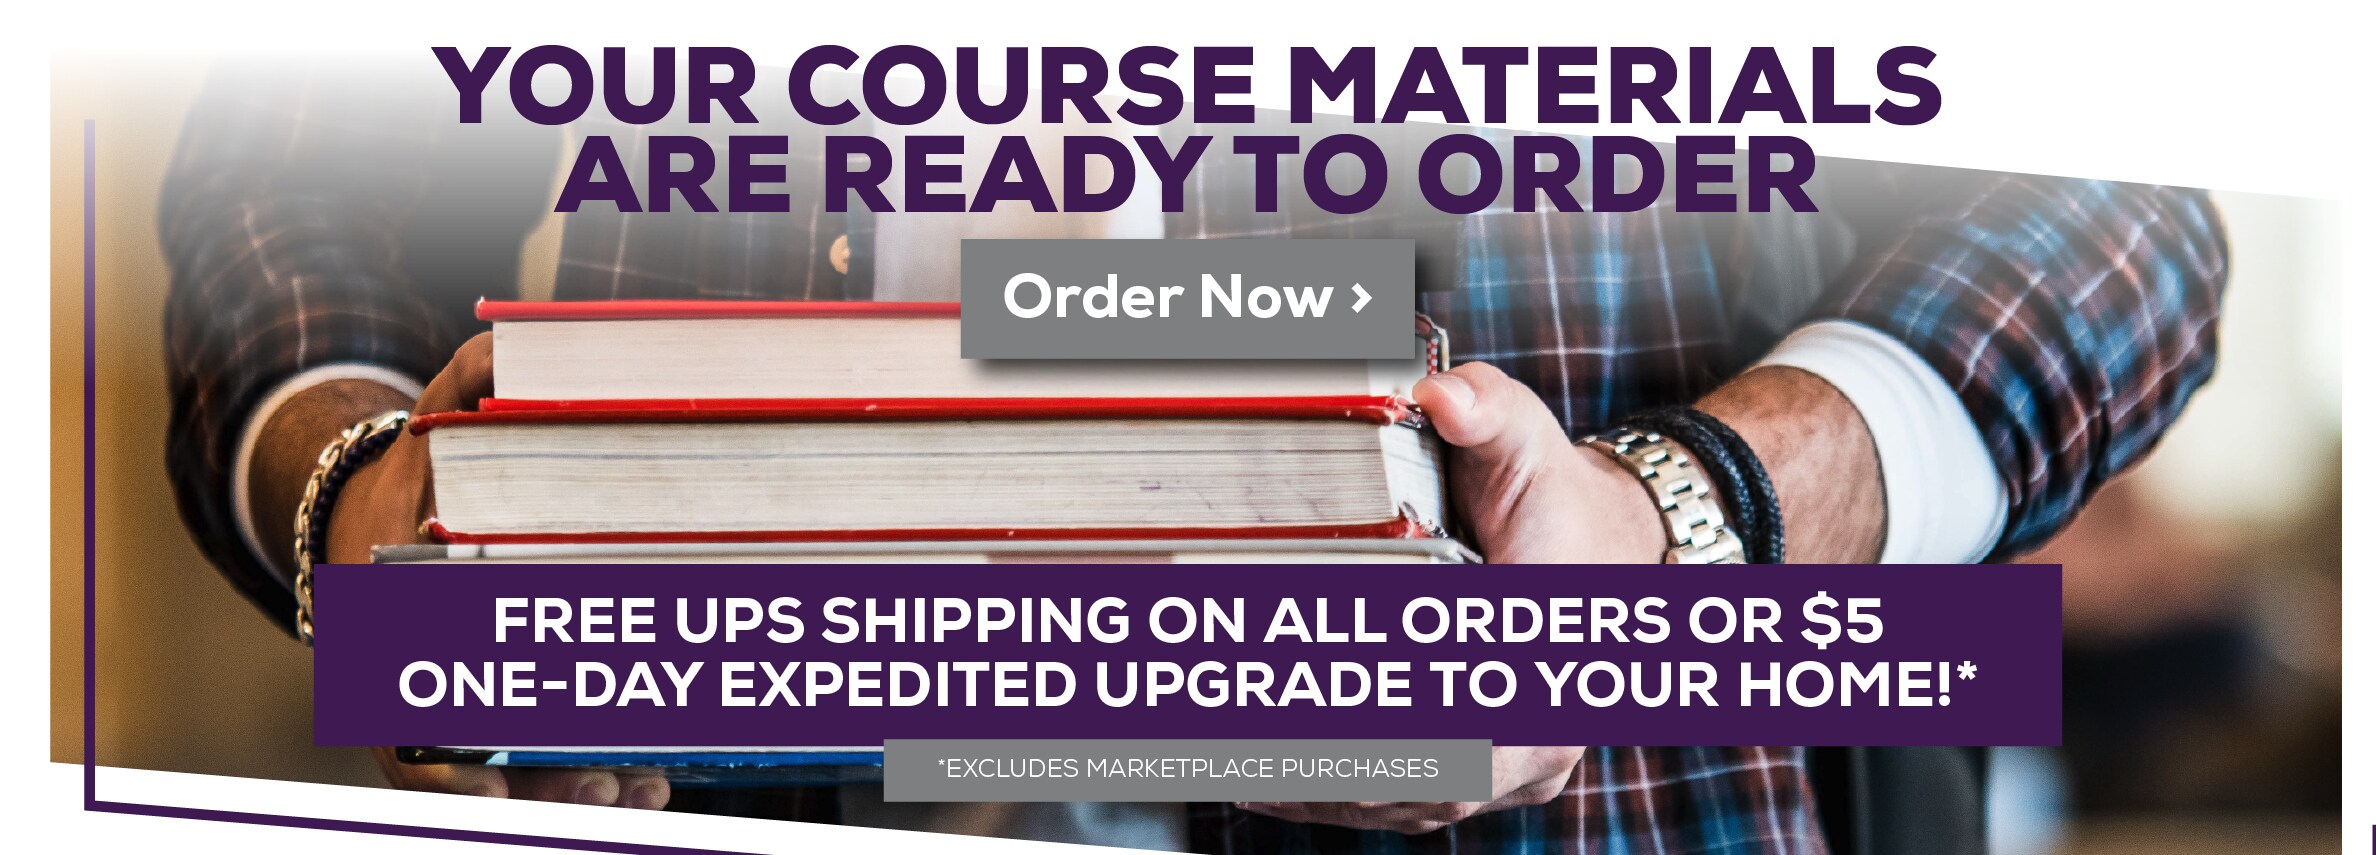 Your Course Materials are Ready to Order. Order Now. Free shipping on all orders or $5 one-day expedited shipping to your home *Excludes marketplace purchases.